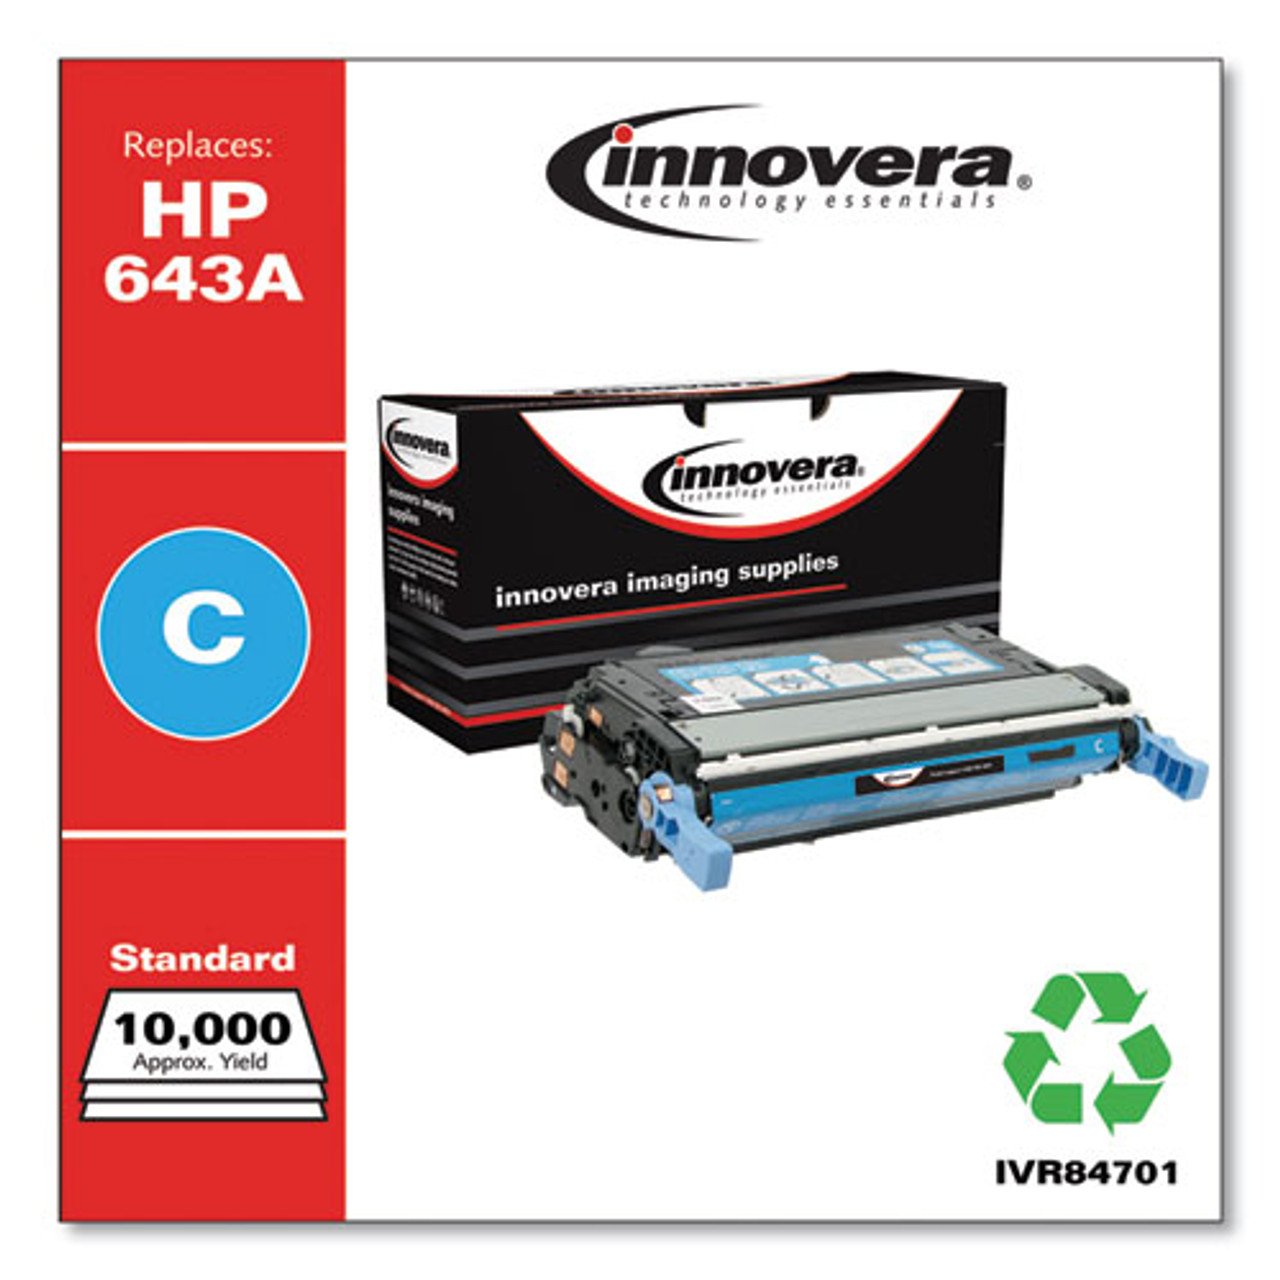 Remanufactured Q5951A (643A) Laser Toner, 10000 Yield, Cyan